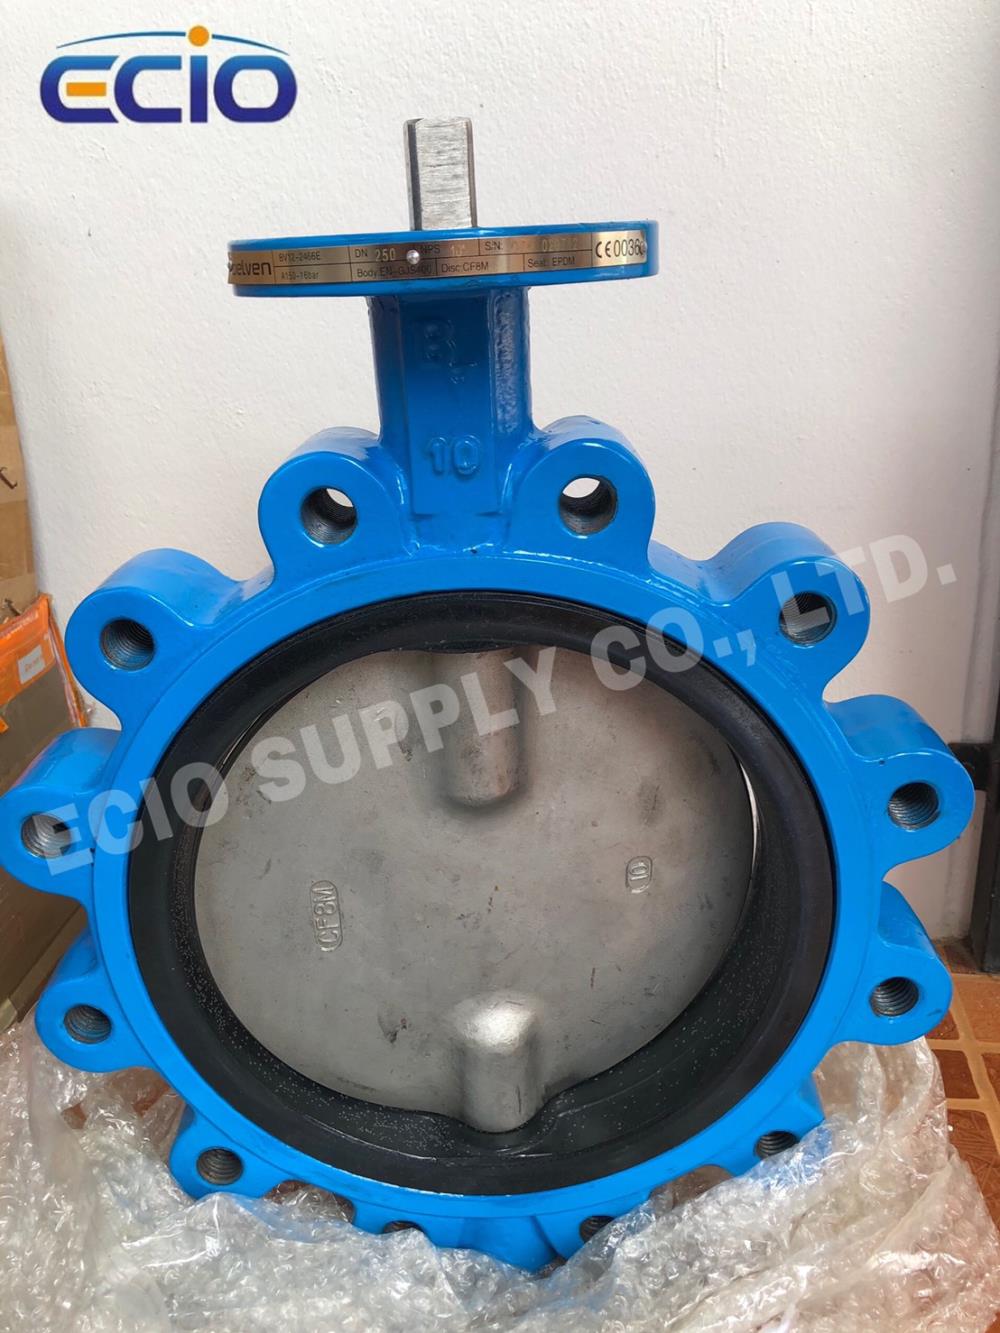 BELVEN Butterfly Valve BV 12-2466E LUG TYPE, DN250,BELVEN Butterfly Valve BV 12-2466E LUG TYPE, DN250,BELVEN,Pumps, Valves and Accessories/Valves/Control Valves